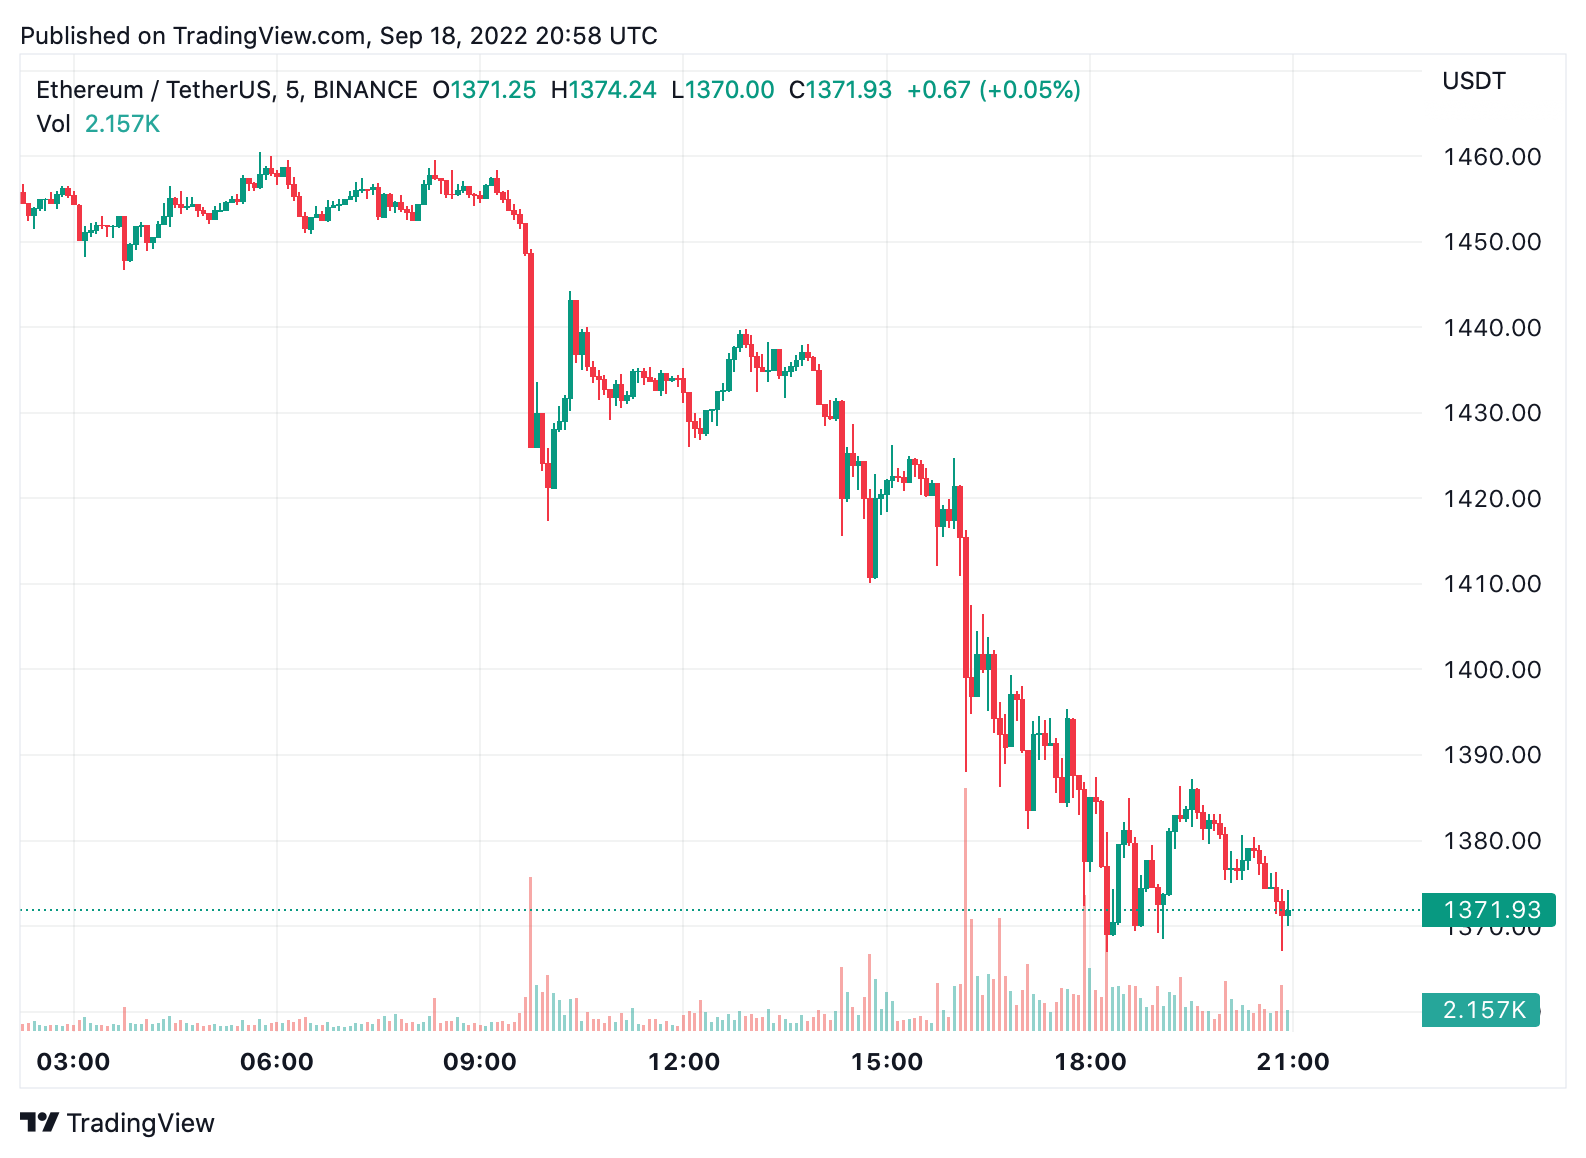 Reversal forecast merger fails as Ethereum market dominance drops 13% in 30 days